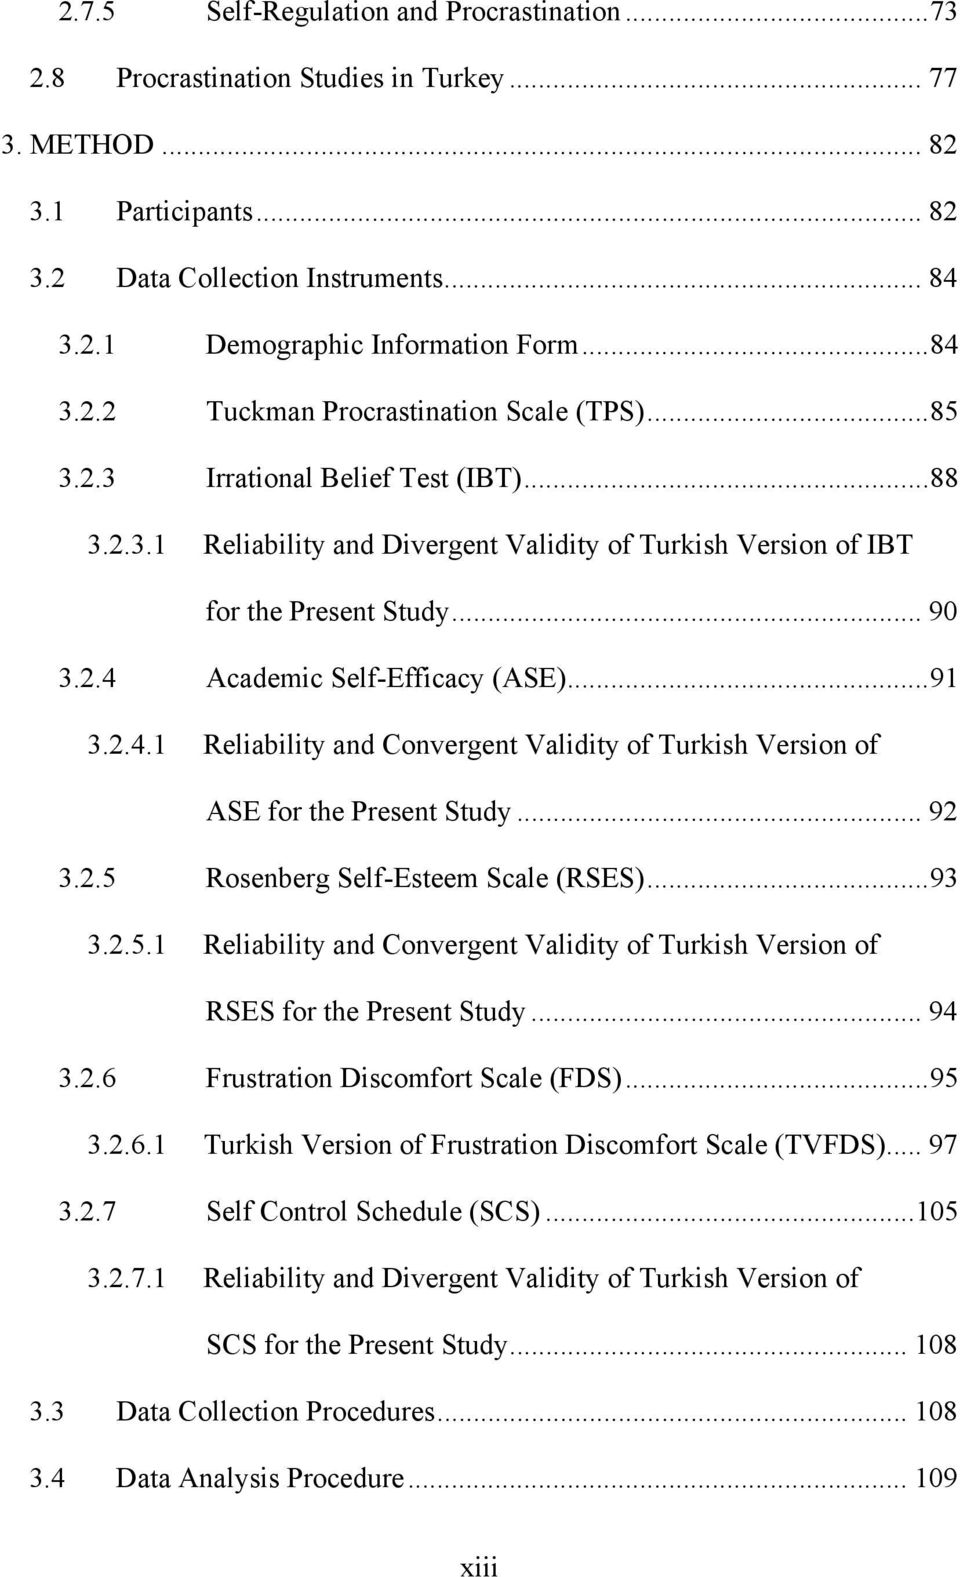 .. 91 3.2.4.1 Reliability and Convergent Validity of Turkish Version of ASE for the Present Study... 92 3.2.5 Rosenberg Self-Esteem Scale (RSES)... 93 3.2.5.1 Reliability and Convergent Validity of Turkish Version of RSES for the Present Study.